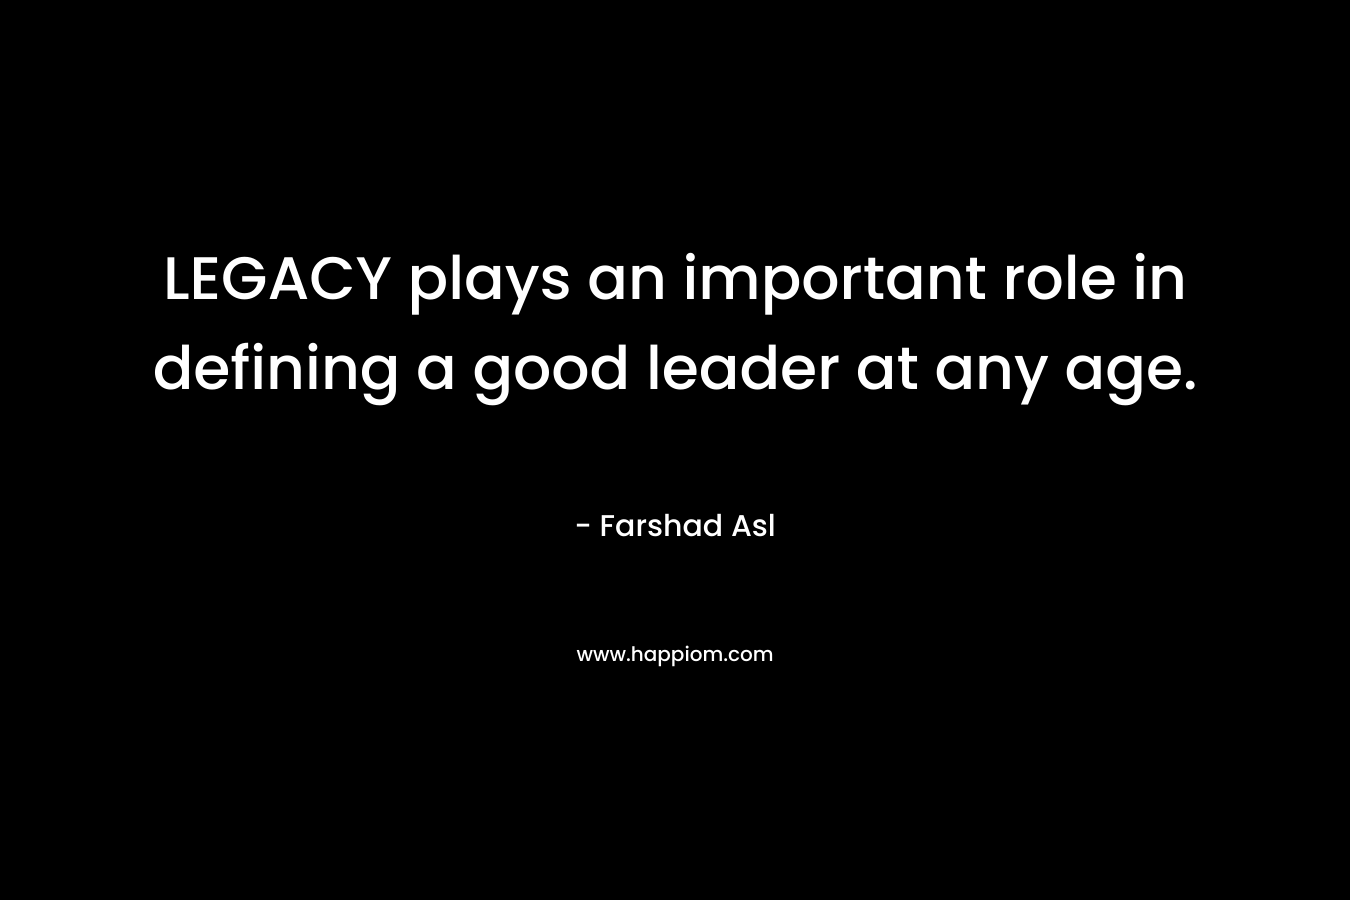 LEGACY plays an important role in defining a good leader at any age.